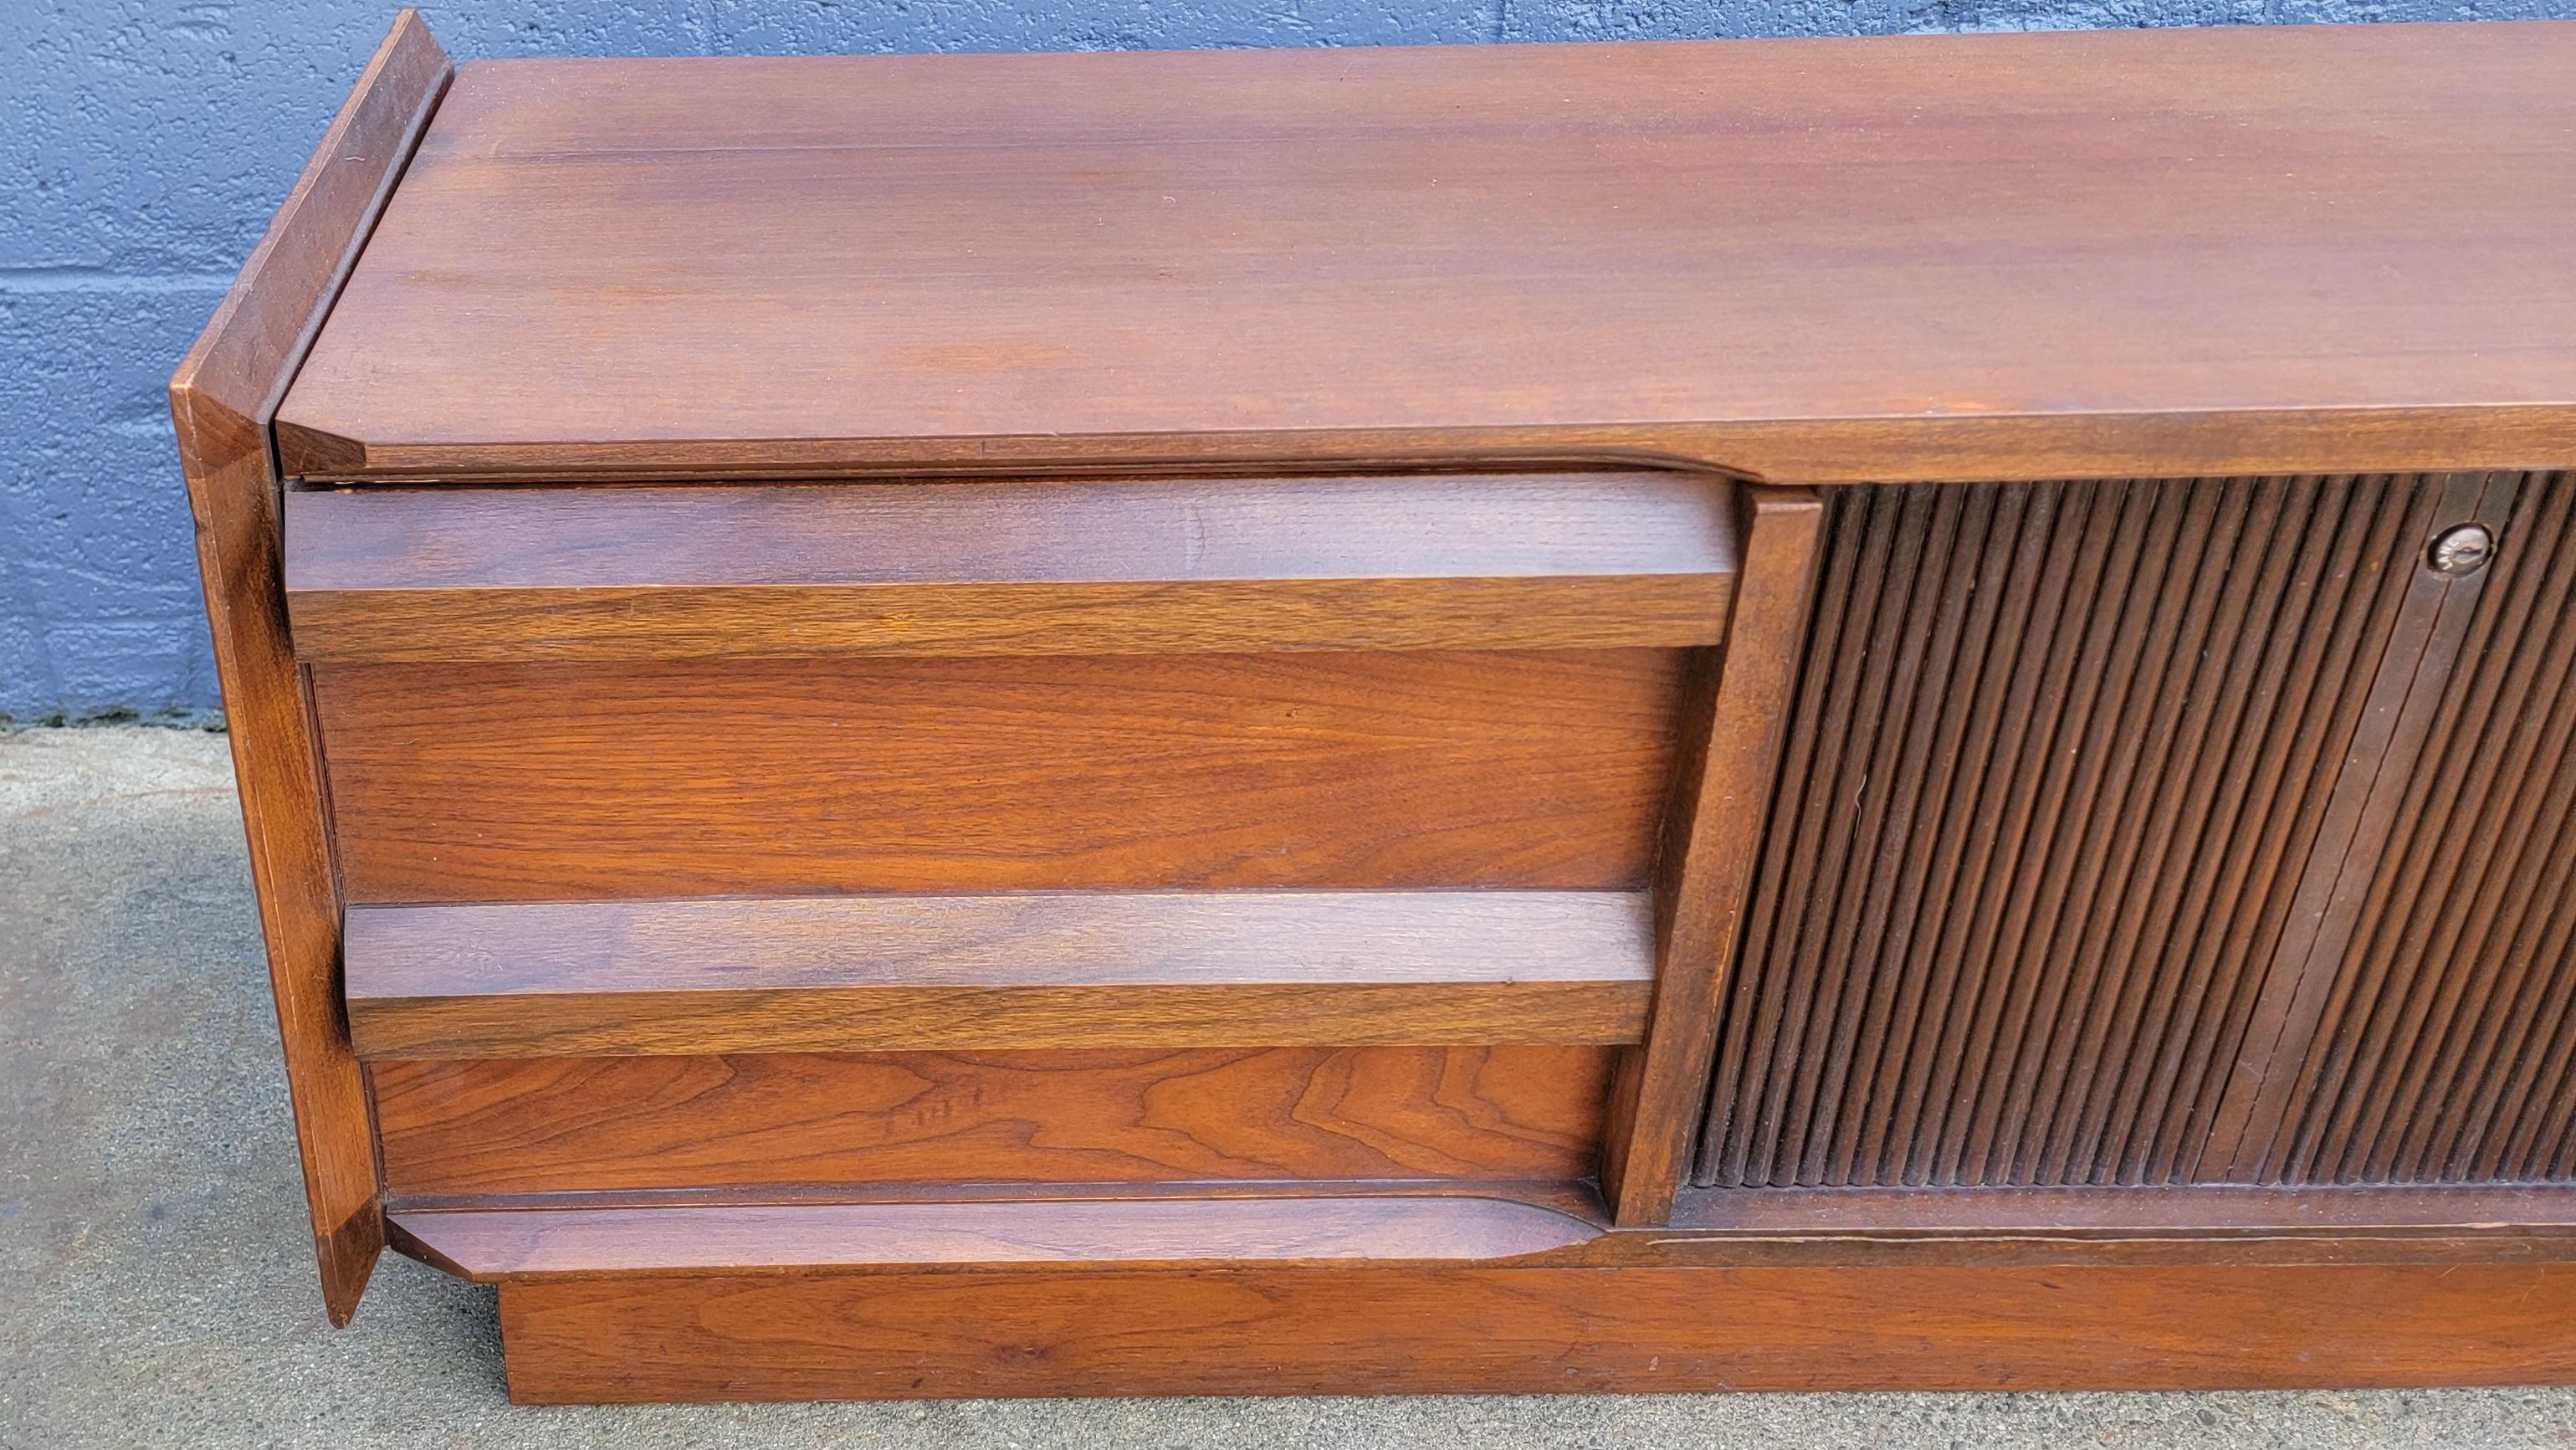 Lane Furniture  First Edition Cedar Blanket Chest In Good Condition For Sale In Fulton, CA